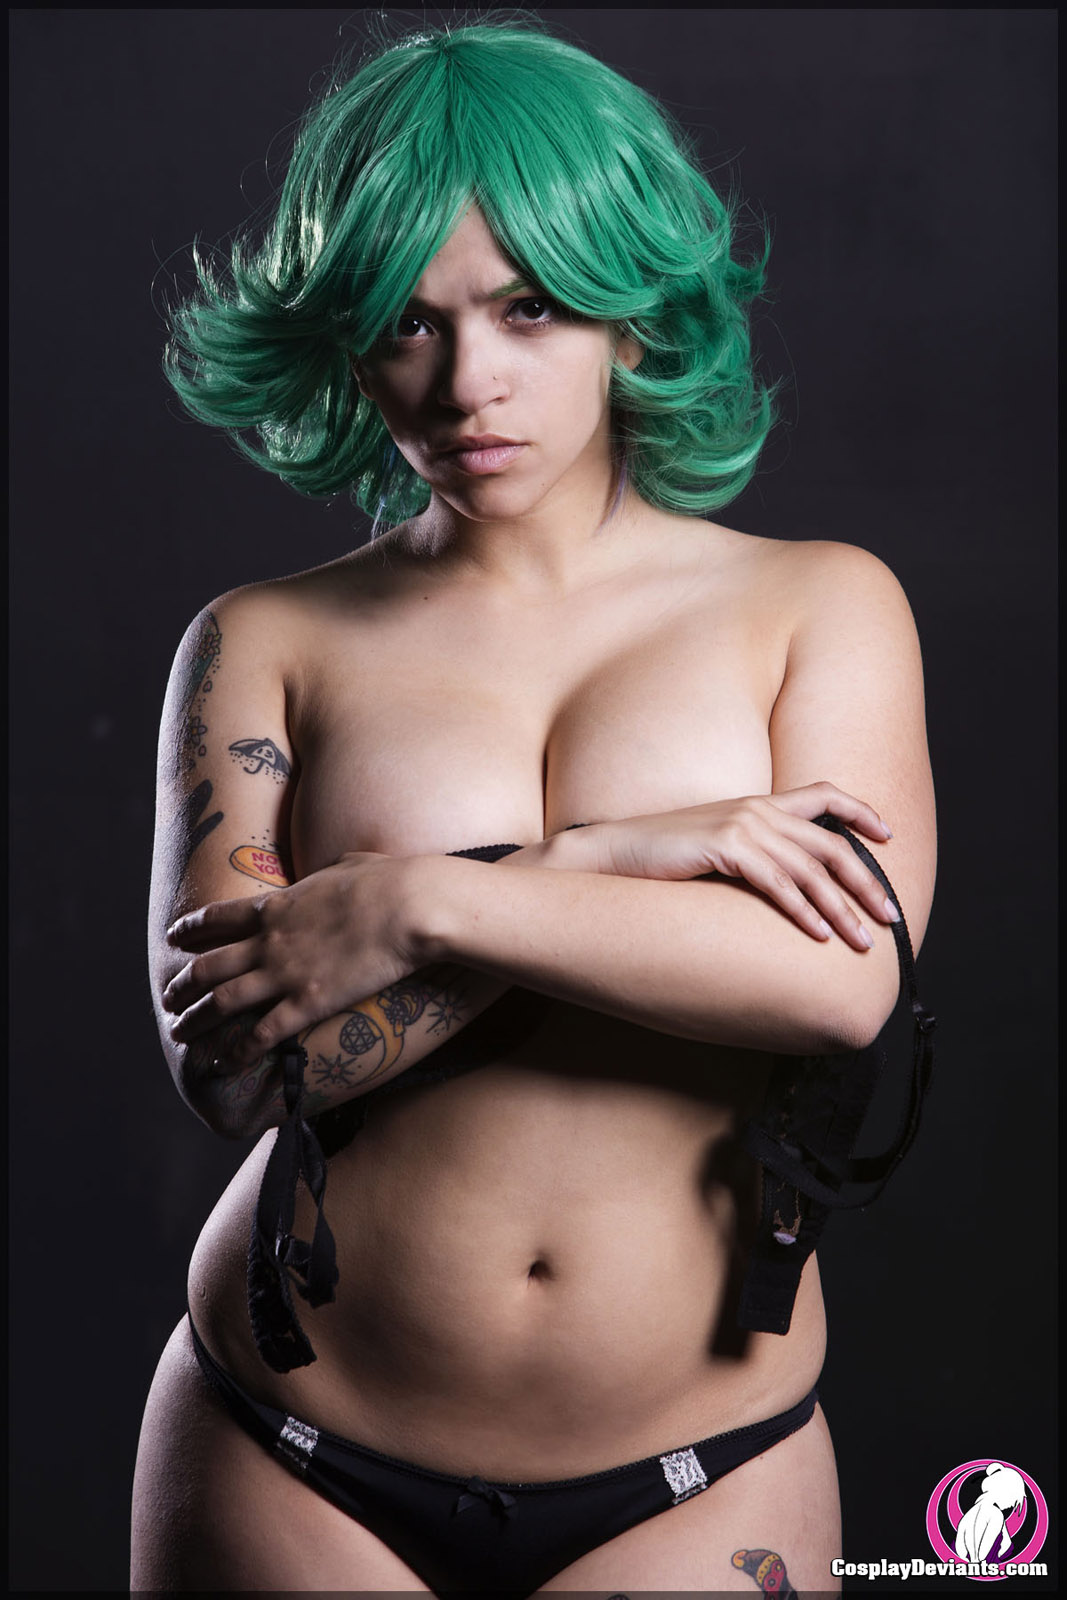 Click here to unlock Lua's full nude content @ Cosplay Deviants.